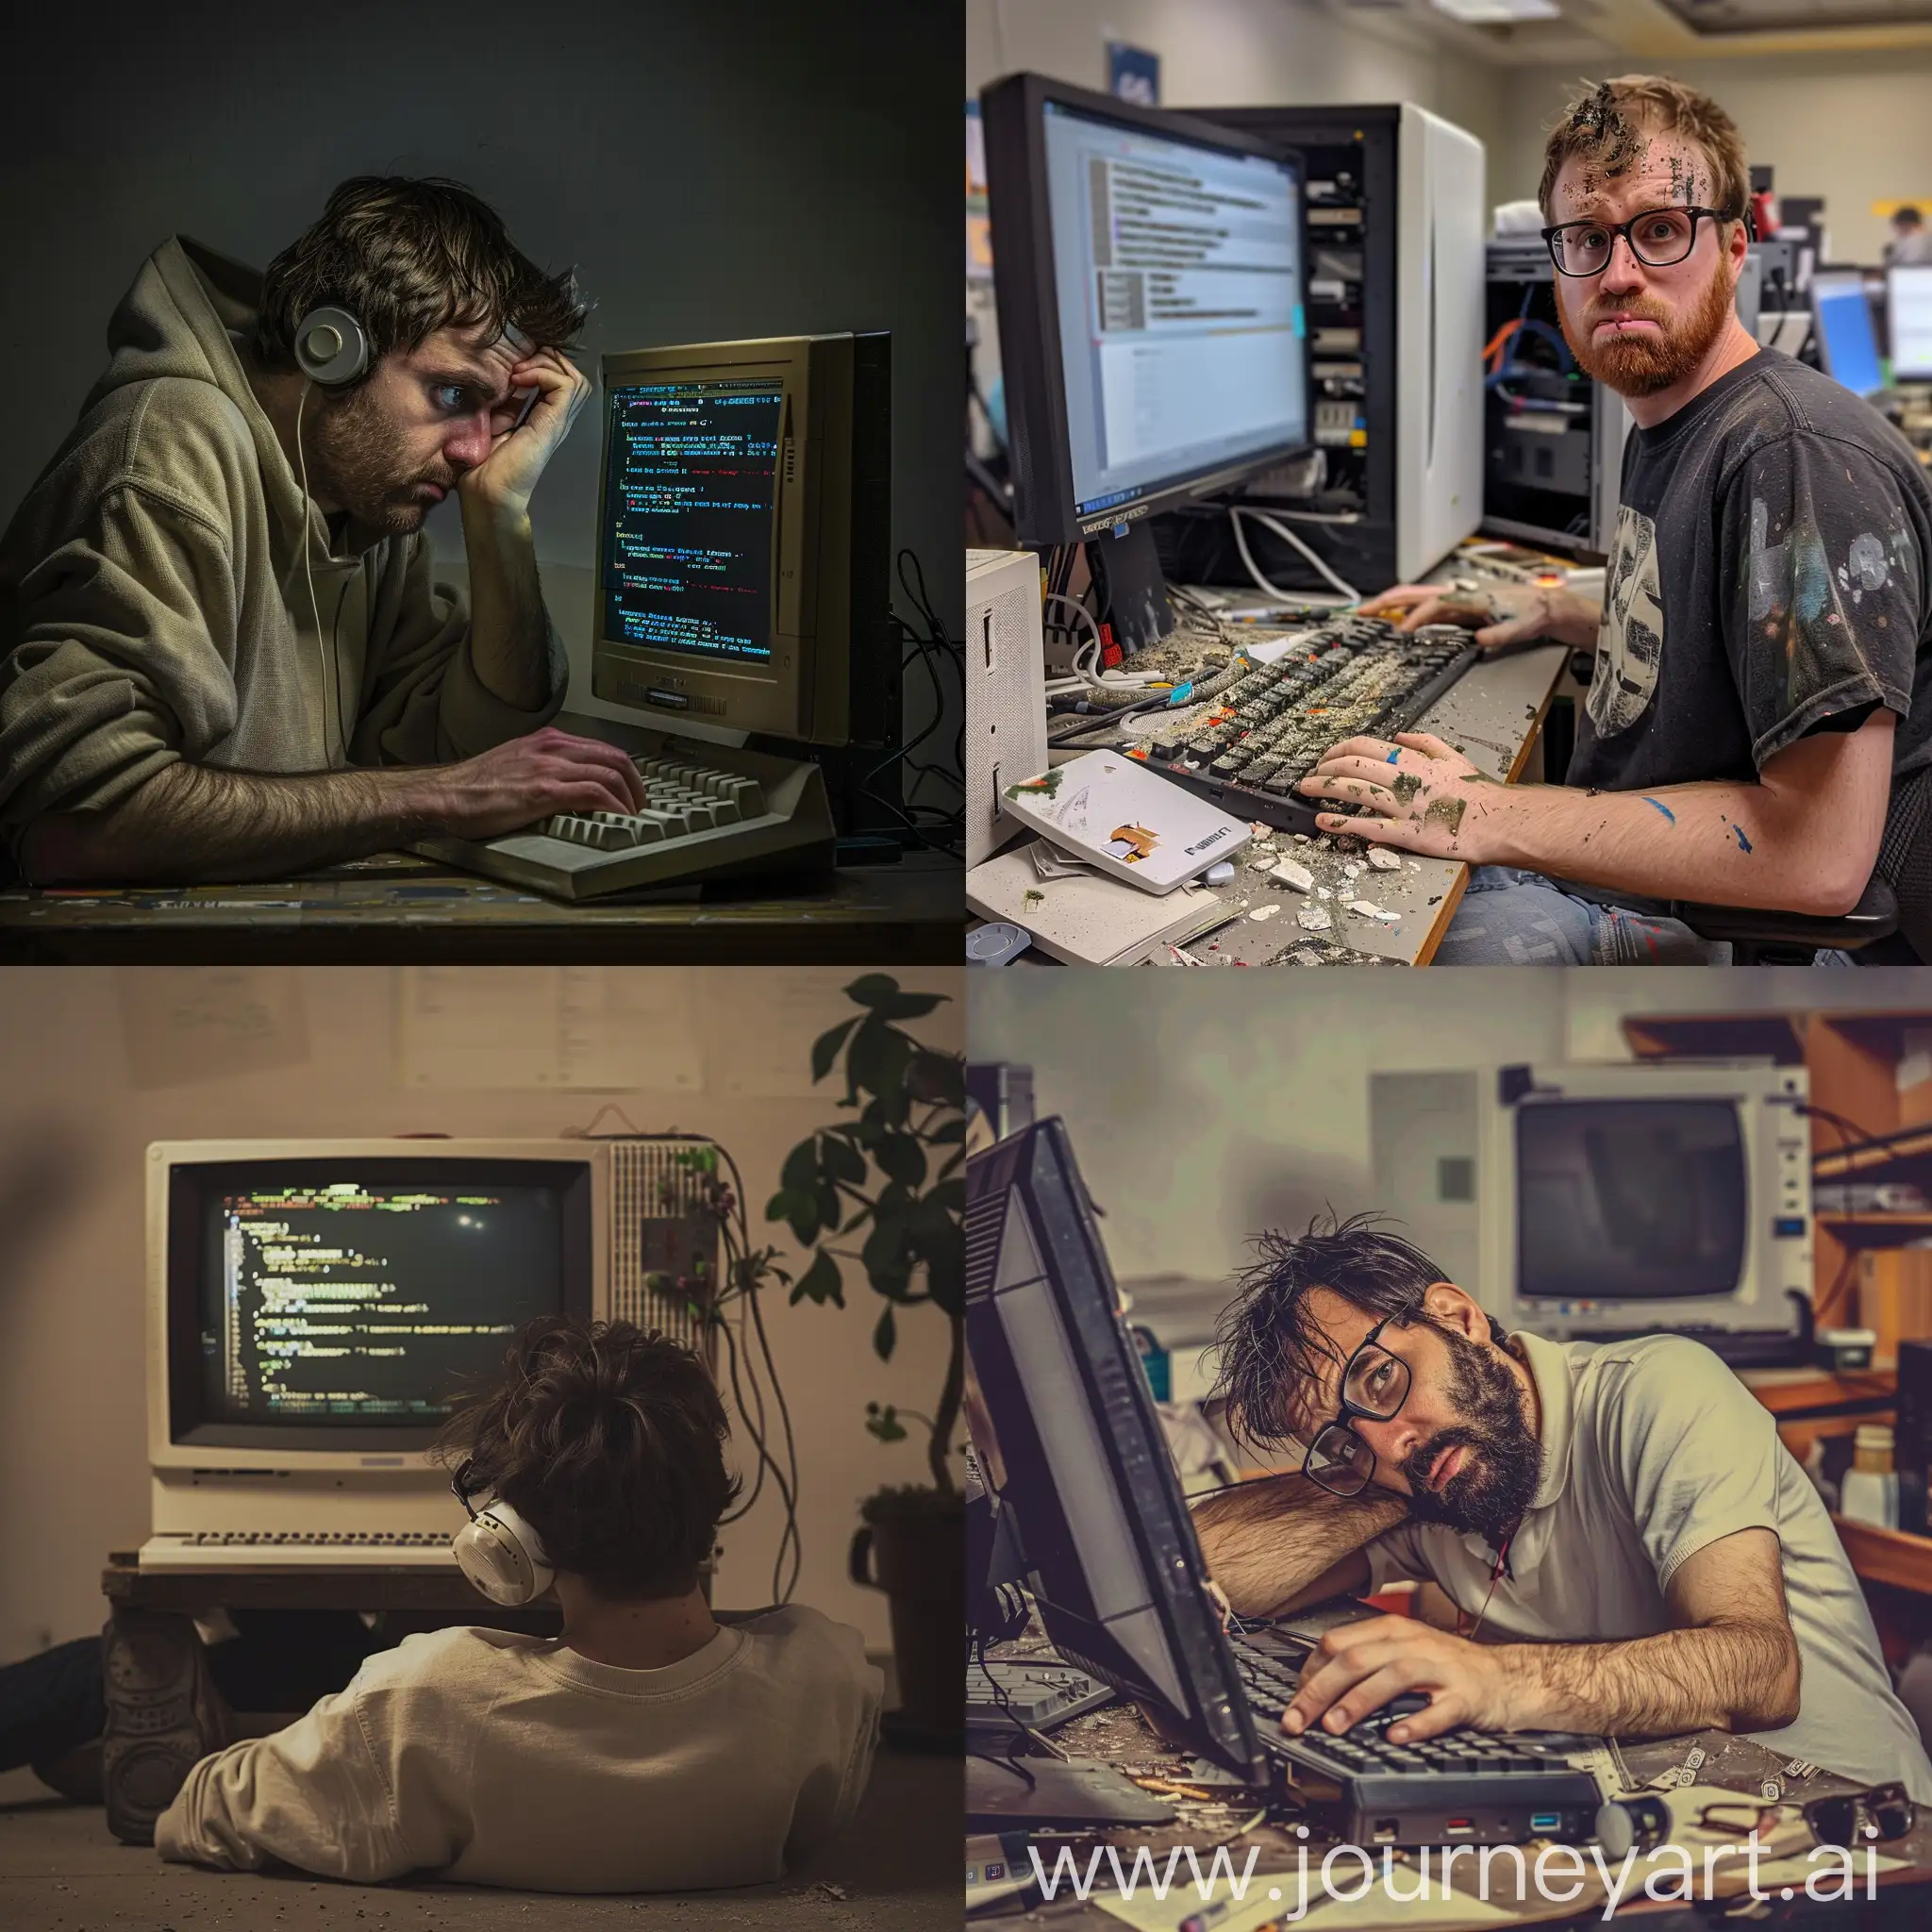 Disgruntled-Programmer-Discards-Computer-Realistic-Meme-Photo